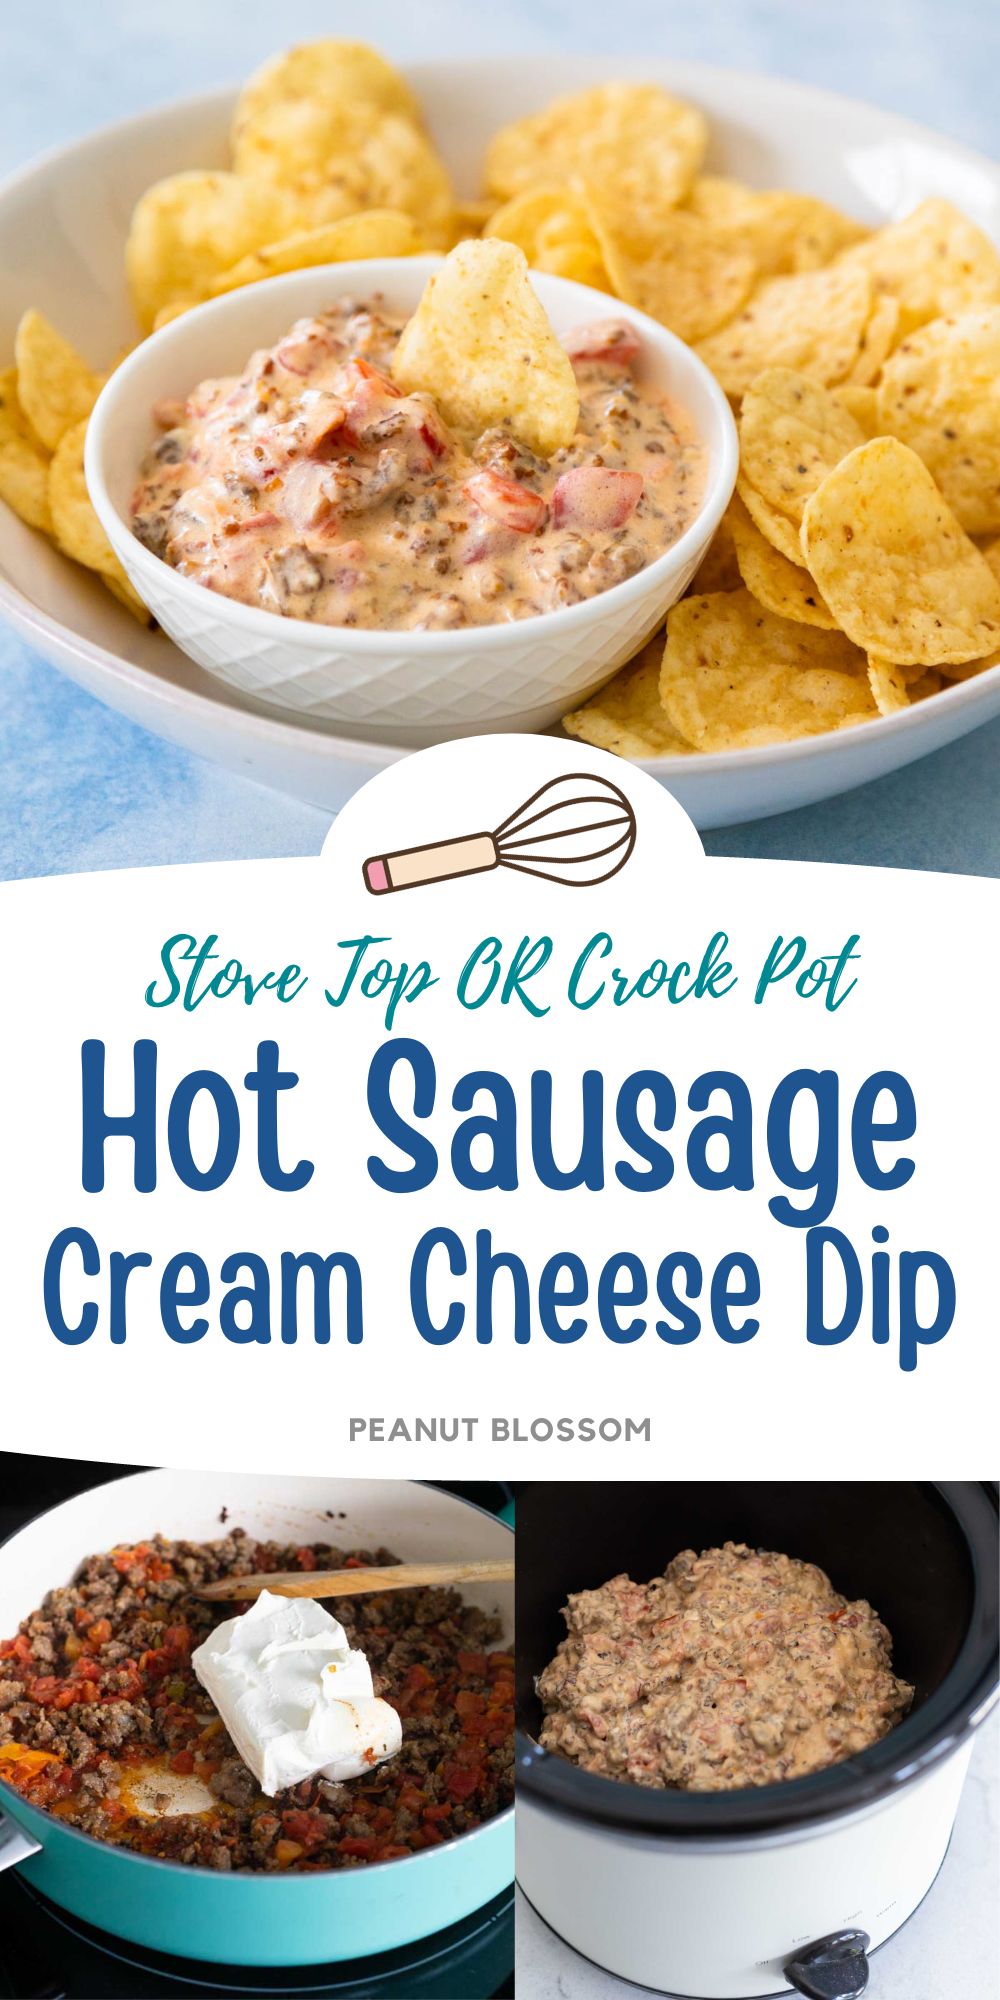 The photo collage shows the sausage dip being served with tortilla chips next to a photo of it being cooked on the stove top and a photo of it being kept warm in a crockpot.